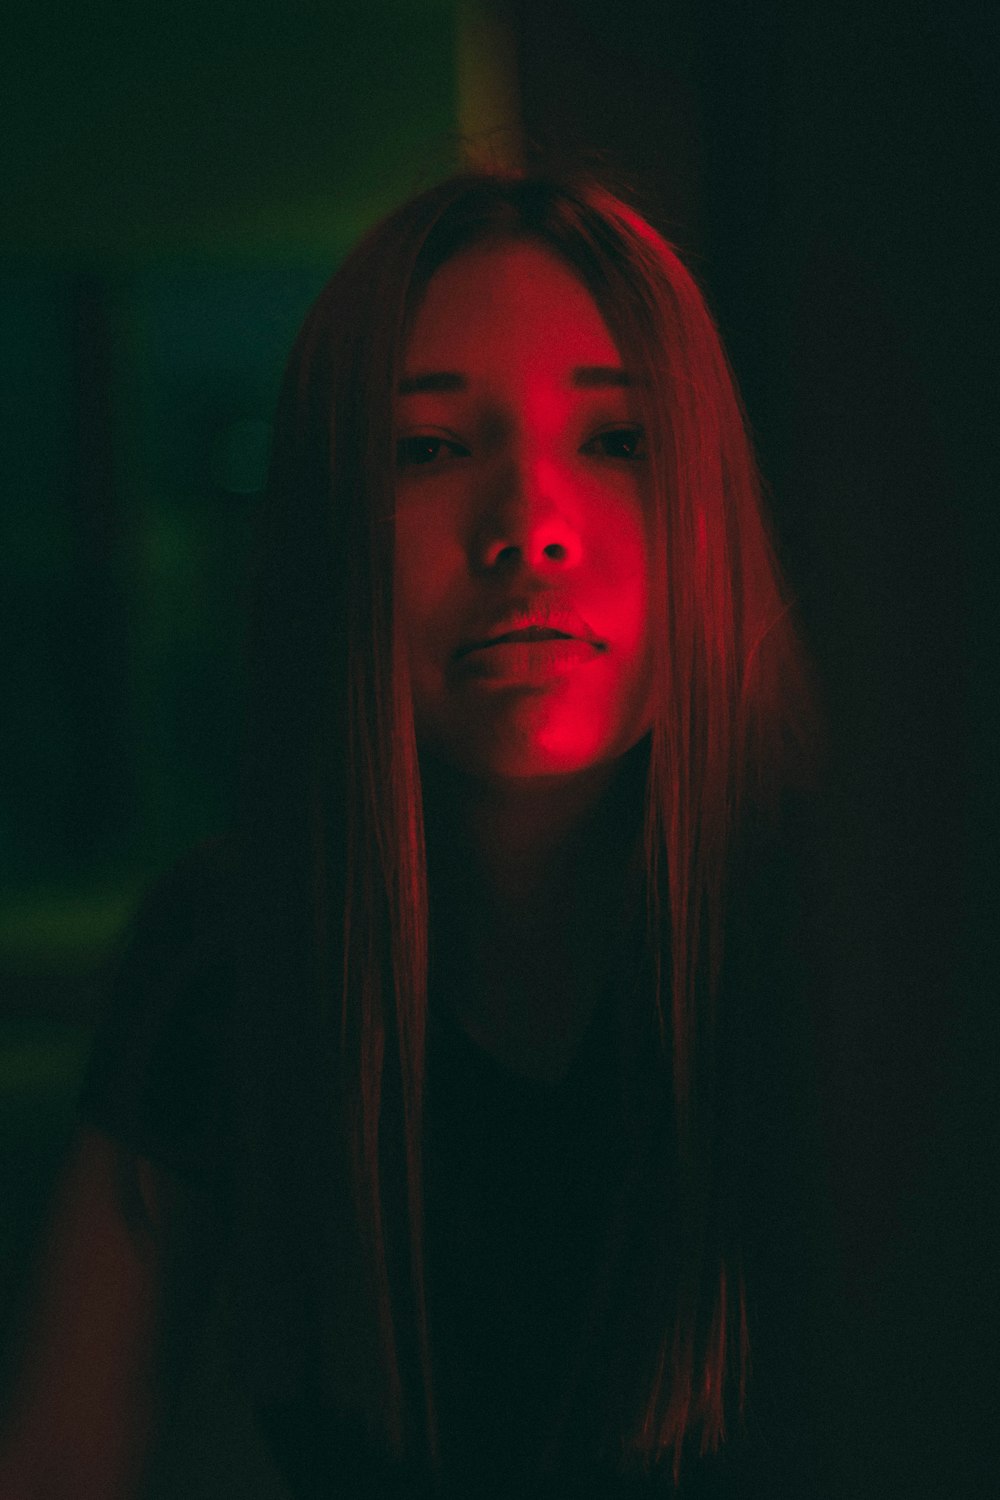 woman with red hair in dark room